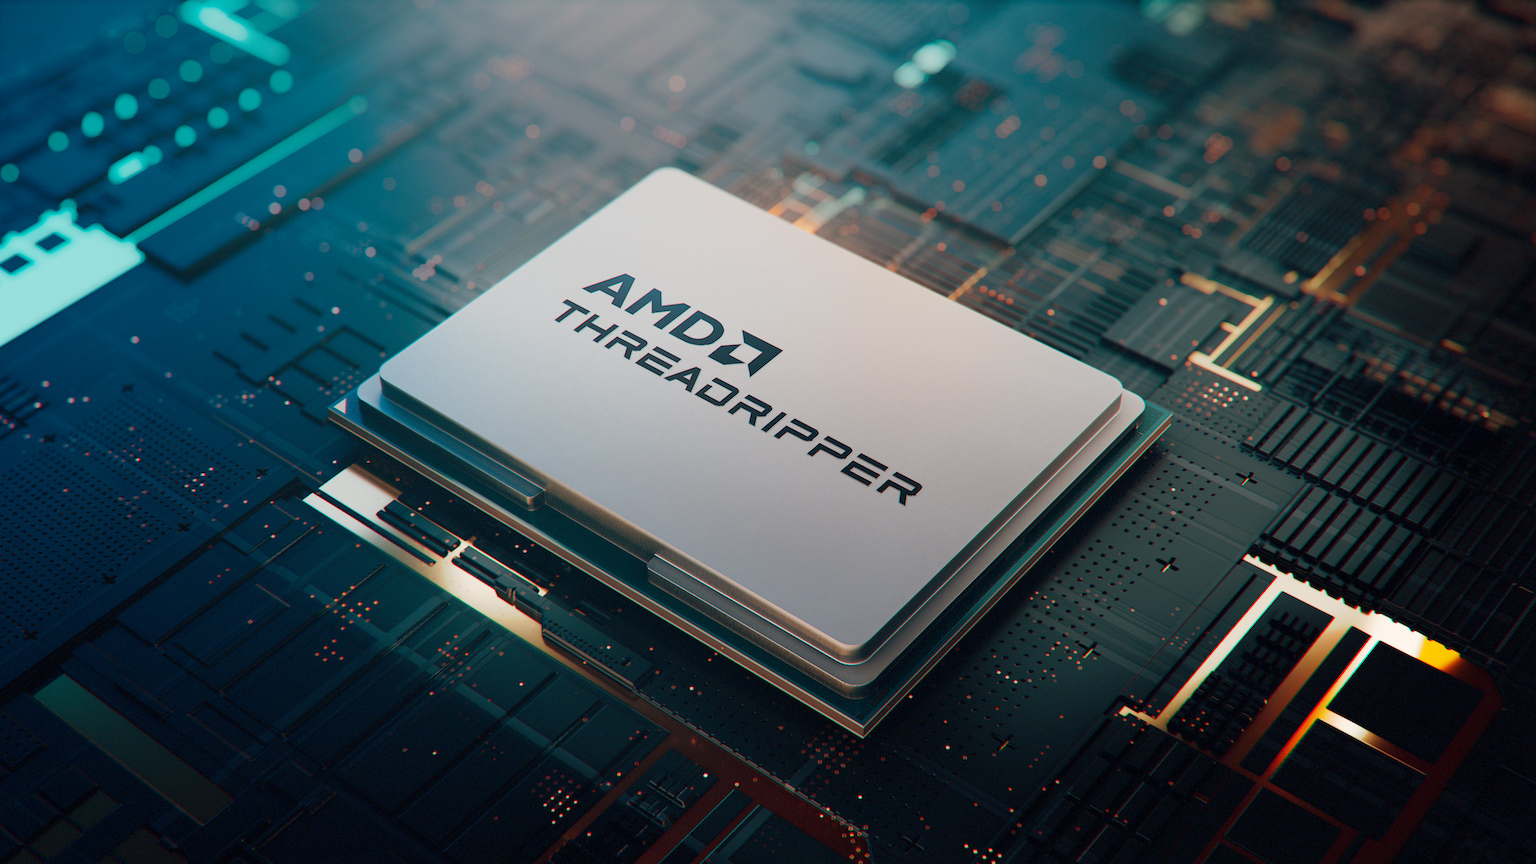 AMD has introduced the latest Threadripper 7000 processors for workstations and HEDT enthusiasts